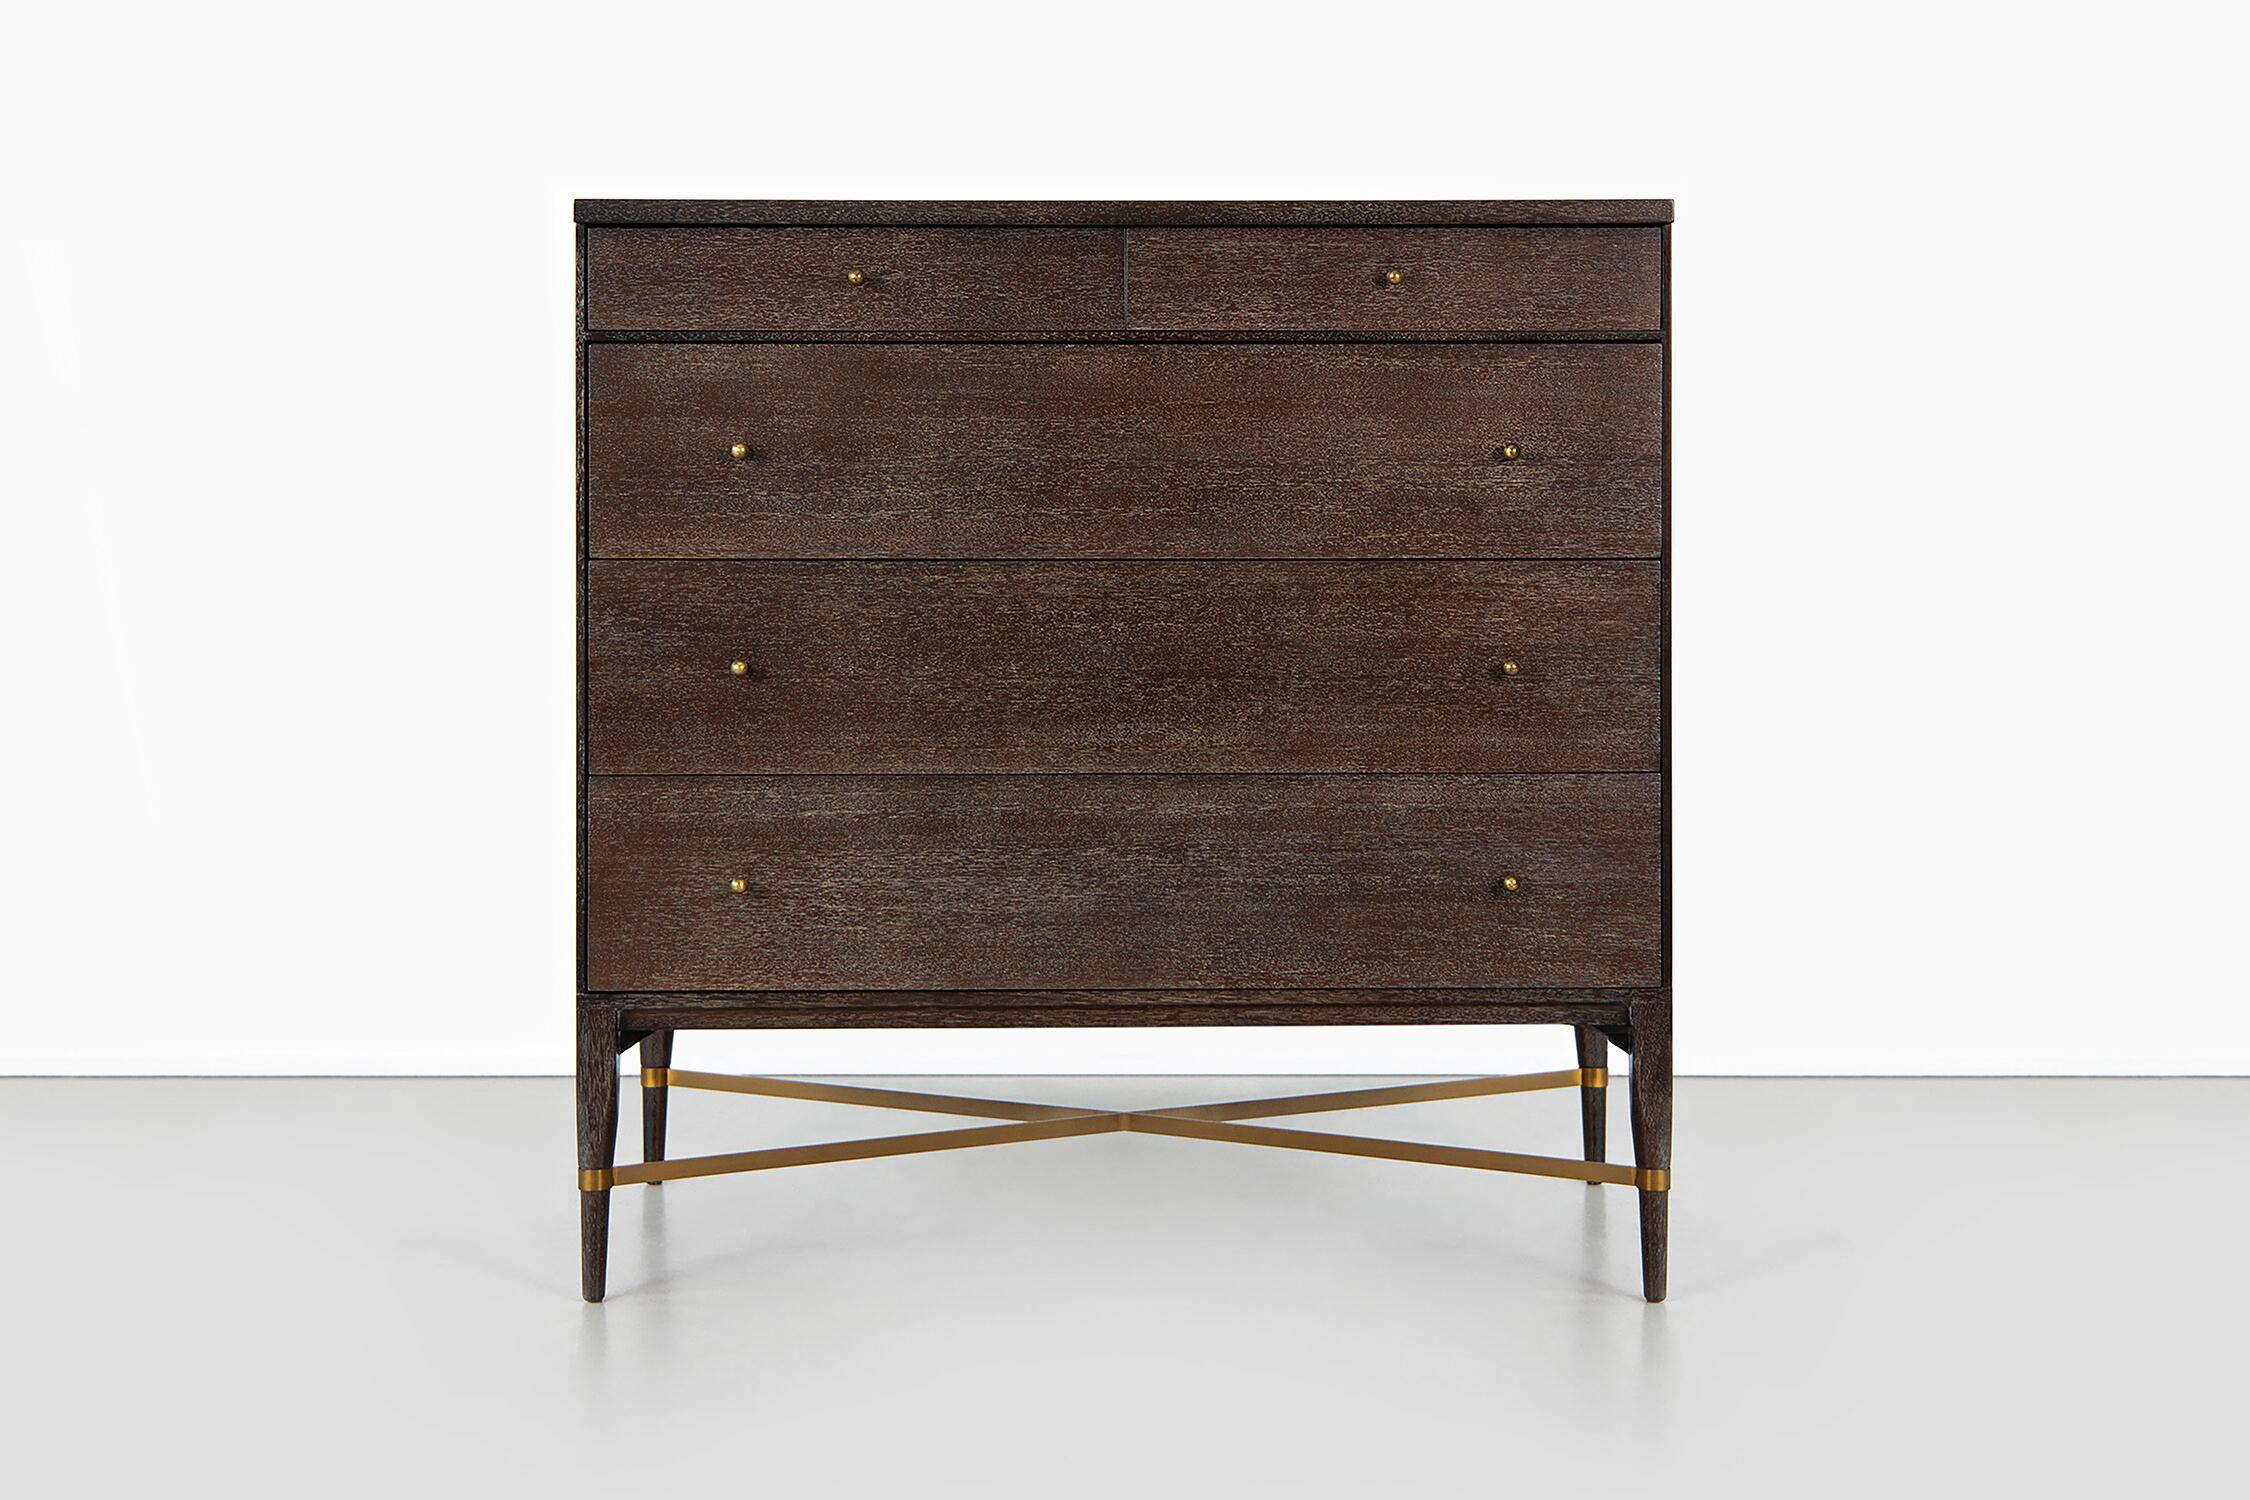 Irwin collection dresser meticulously refinished

Designed by Paul McCobb for Calvin

USA, circa 1950s

Cerused mahogany and brass

Measures: 36?” H x 36” W x 19 ¼” D
 
Not all furniture is on display at the gallery.